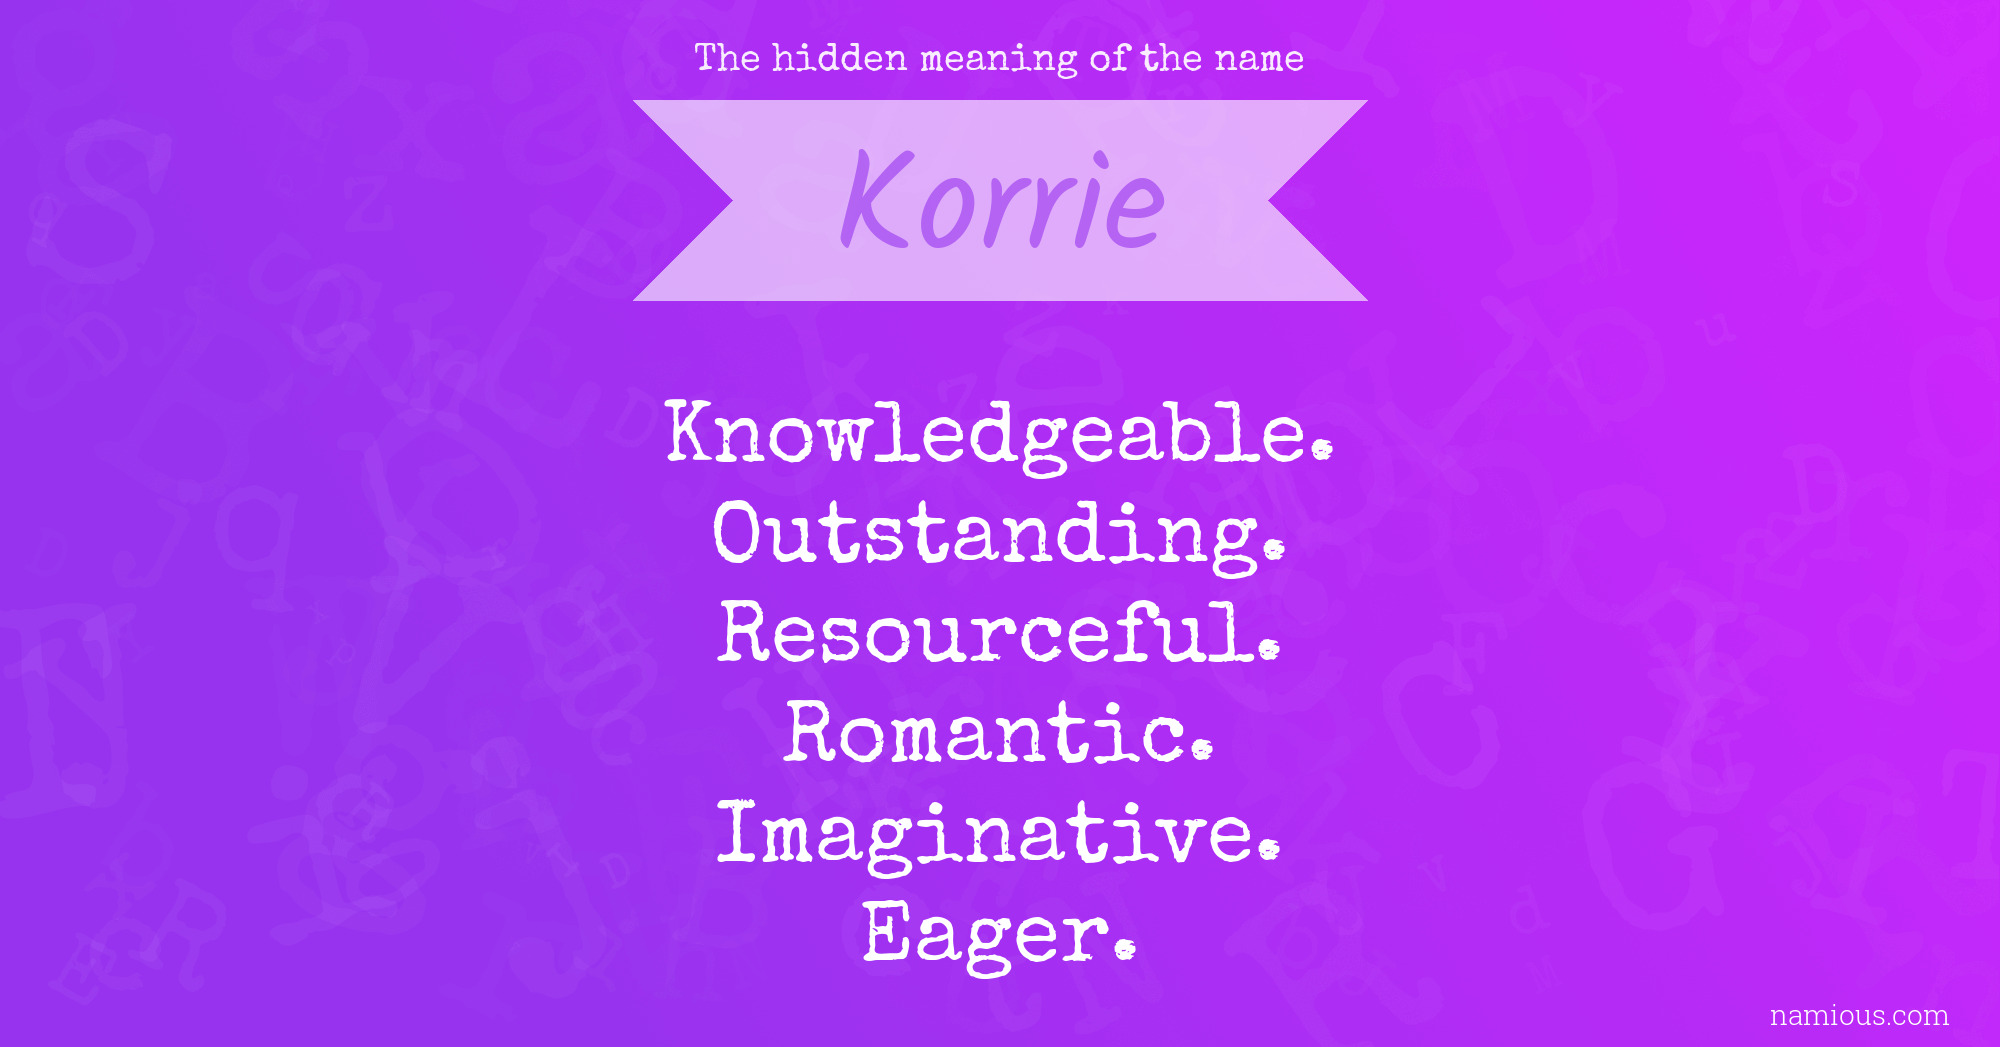 The hidden meaning of the name Korrie